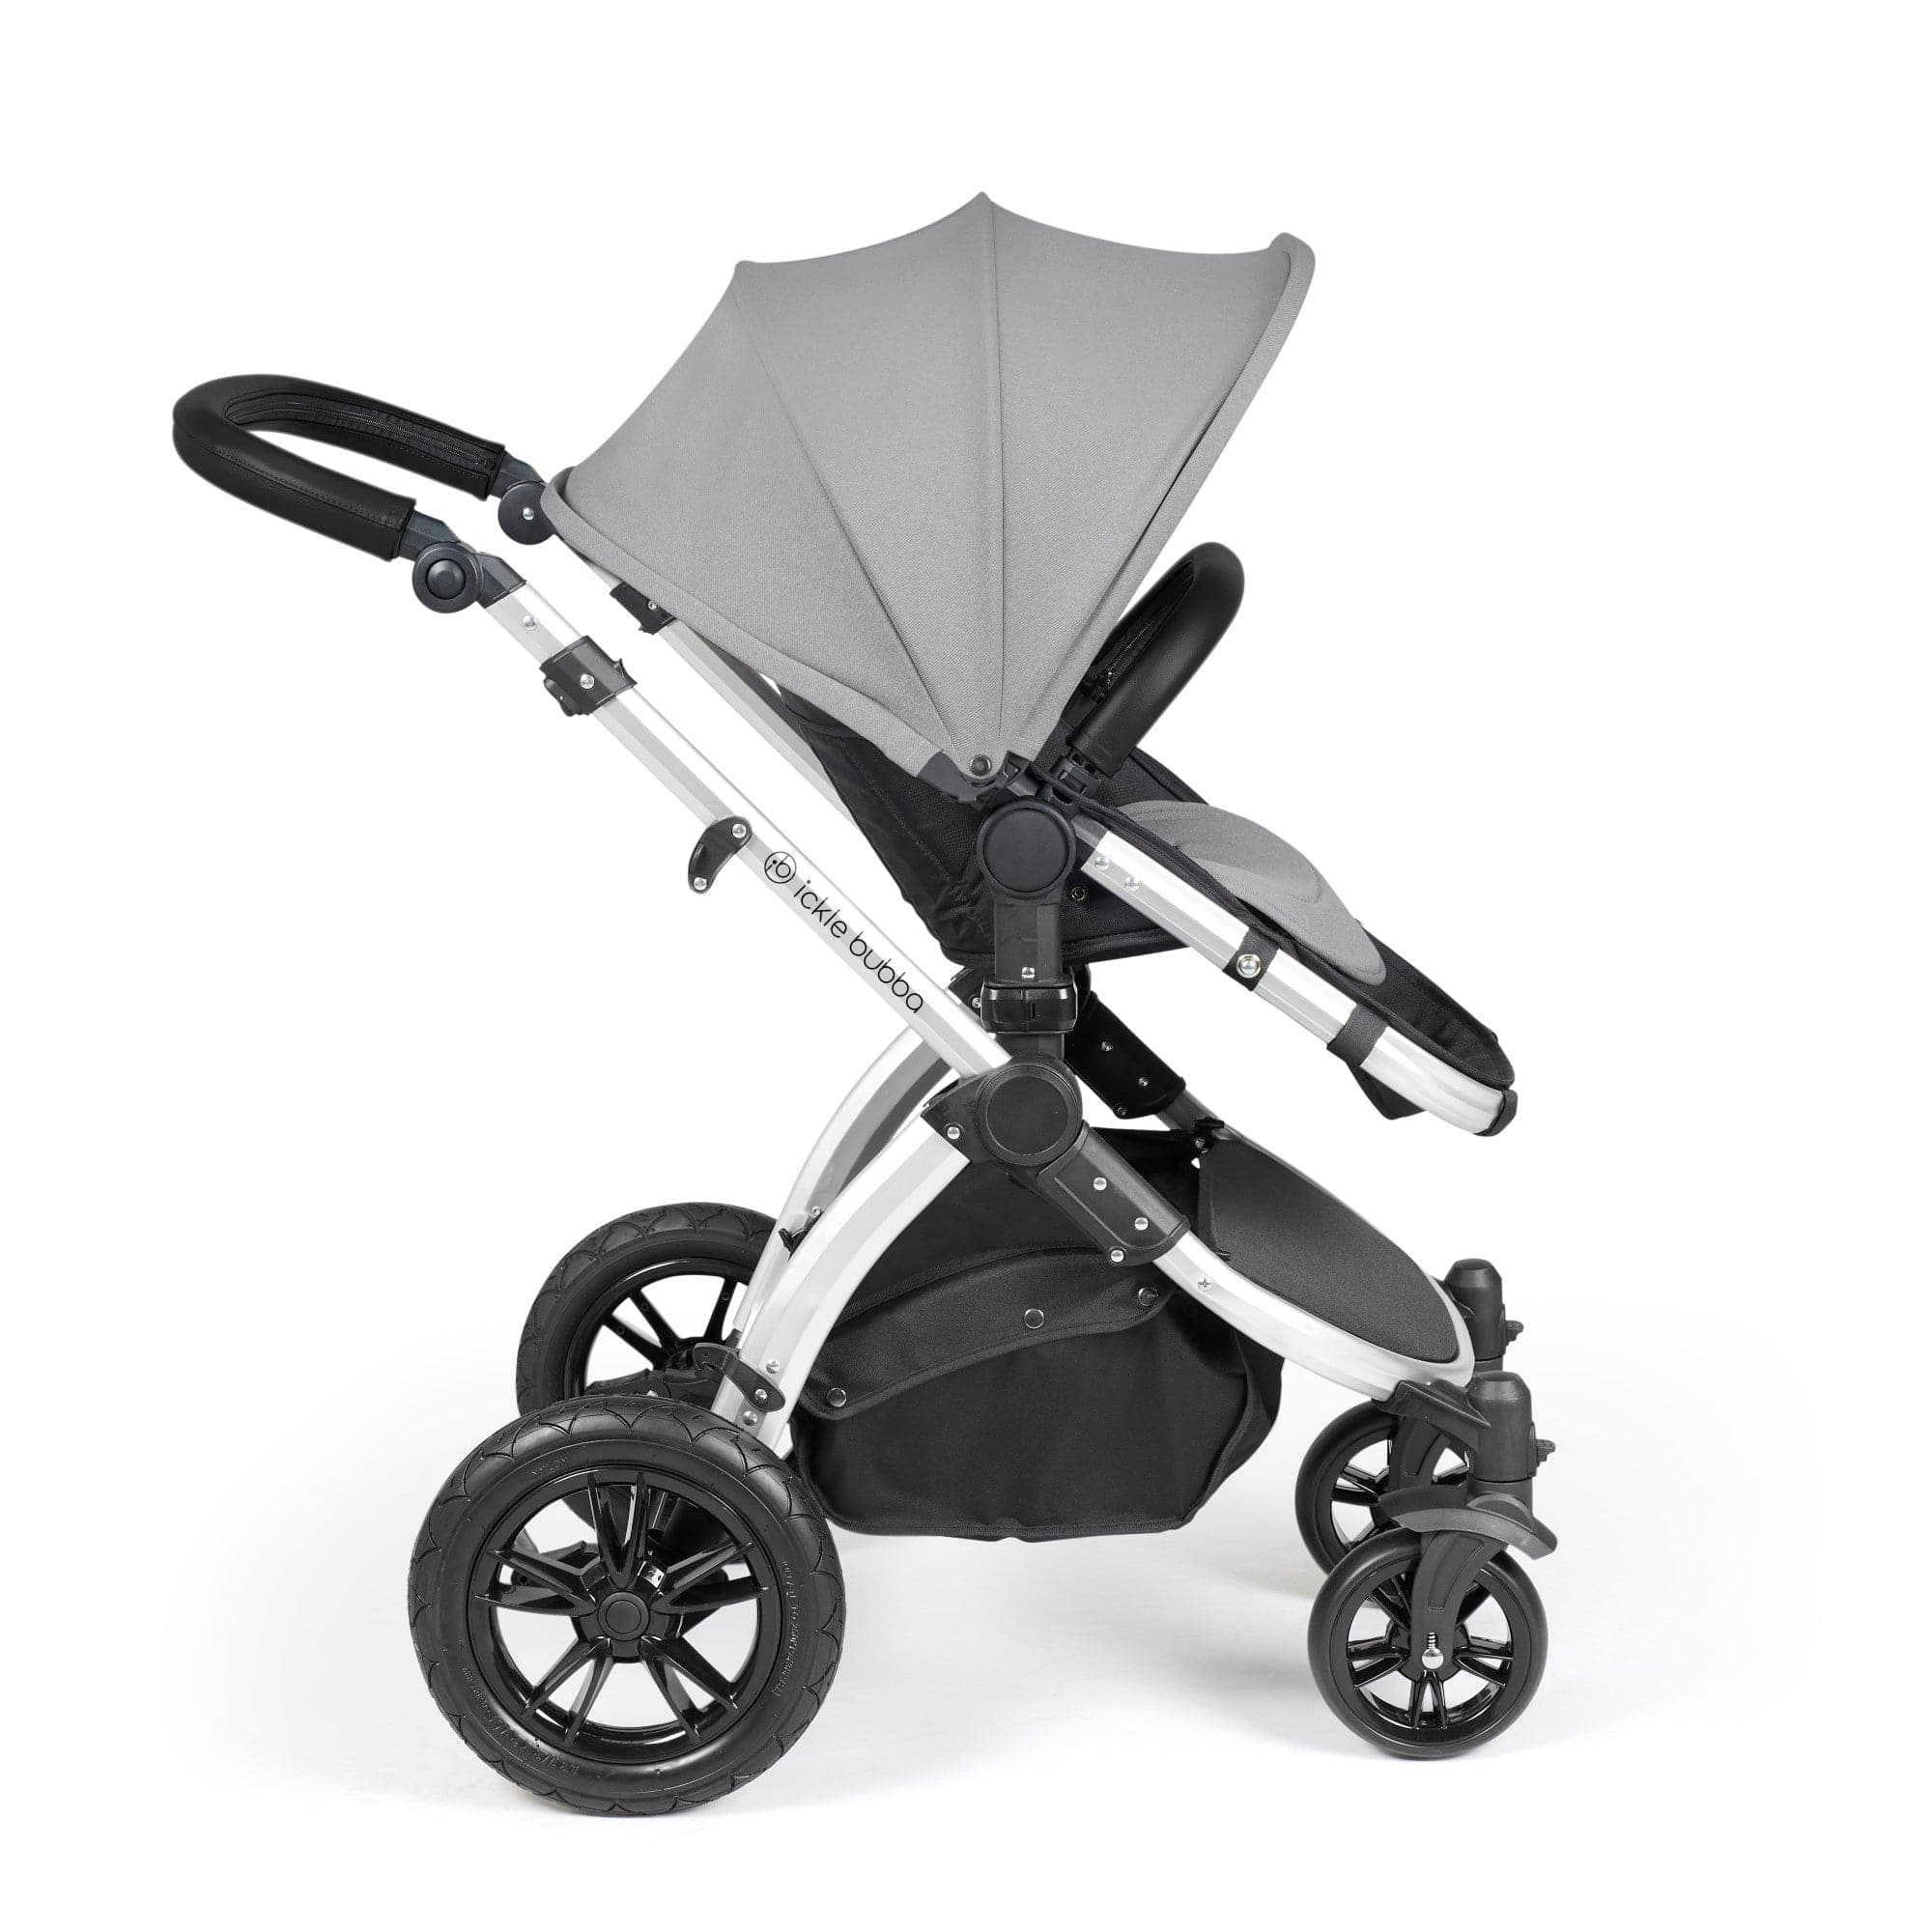 Ickle Bubba Stomp Luxe All-In-One I-Size Travel System With Isofix Base - Silver / Pearl Grey / Black -  | For Your Little One